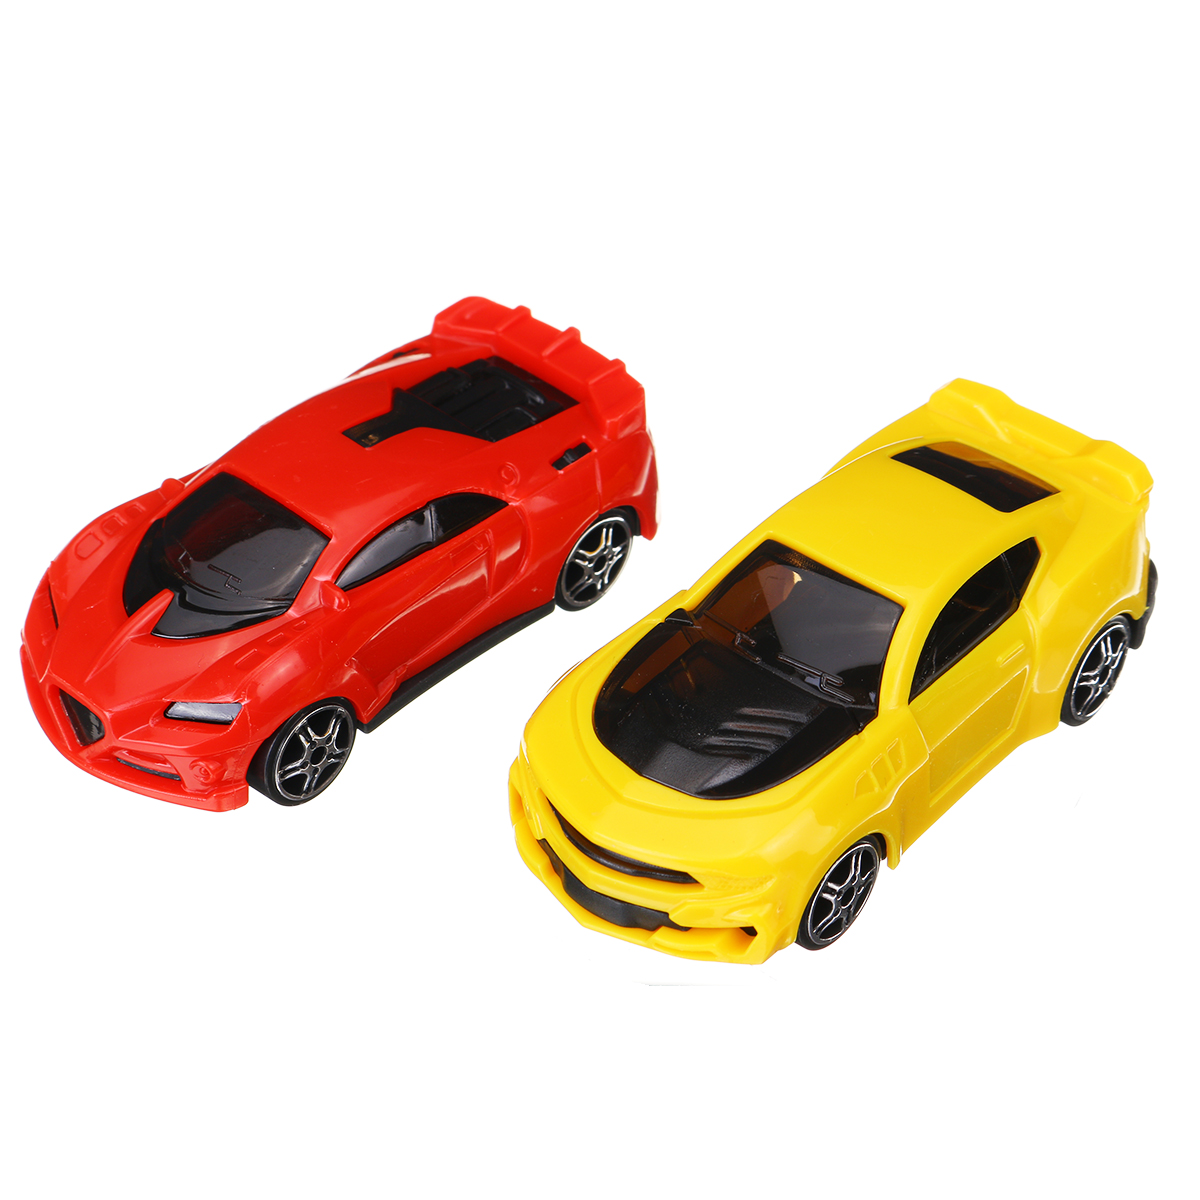 Storage-Transport-Aircraft-Model-Inertia-Diecast-Model-Car-Set-Toy-for-Childrens-Gift-1621631-8